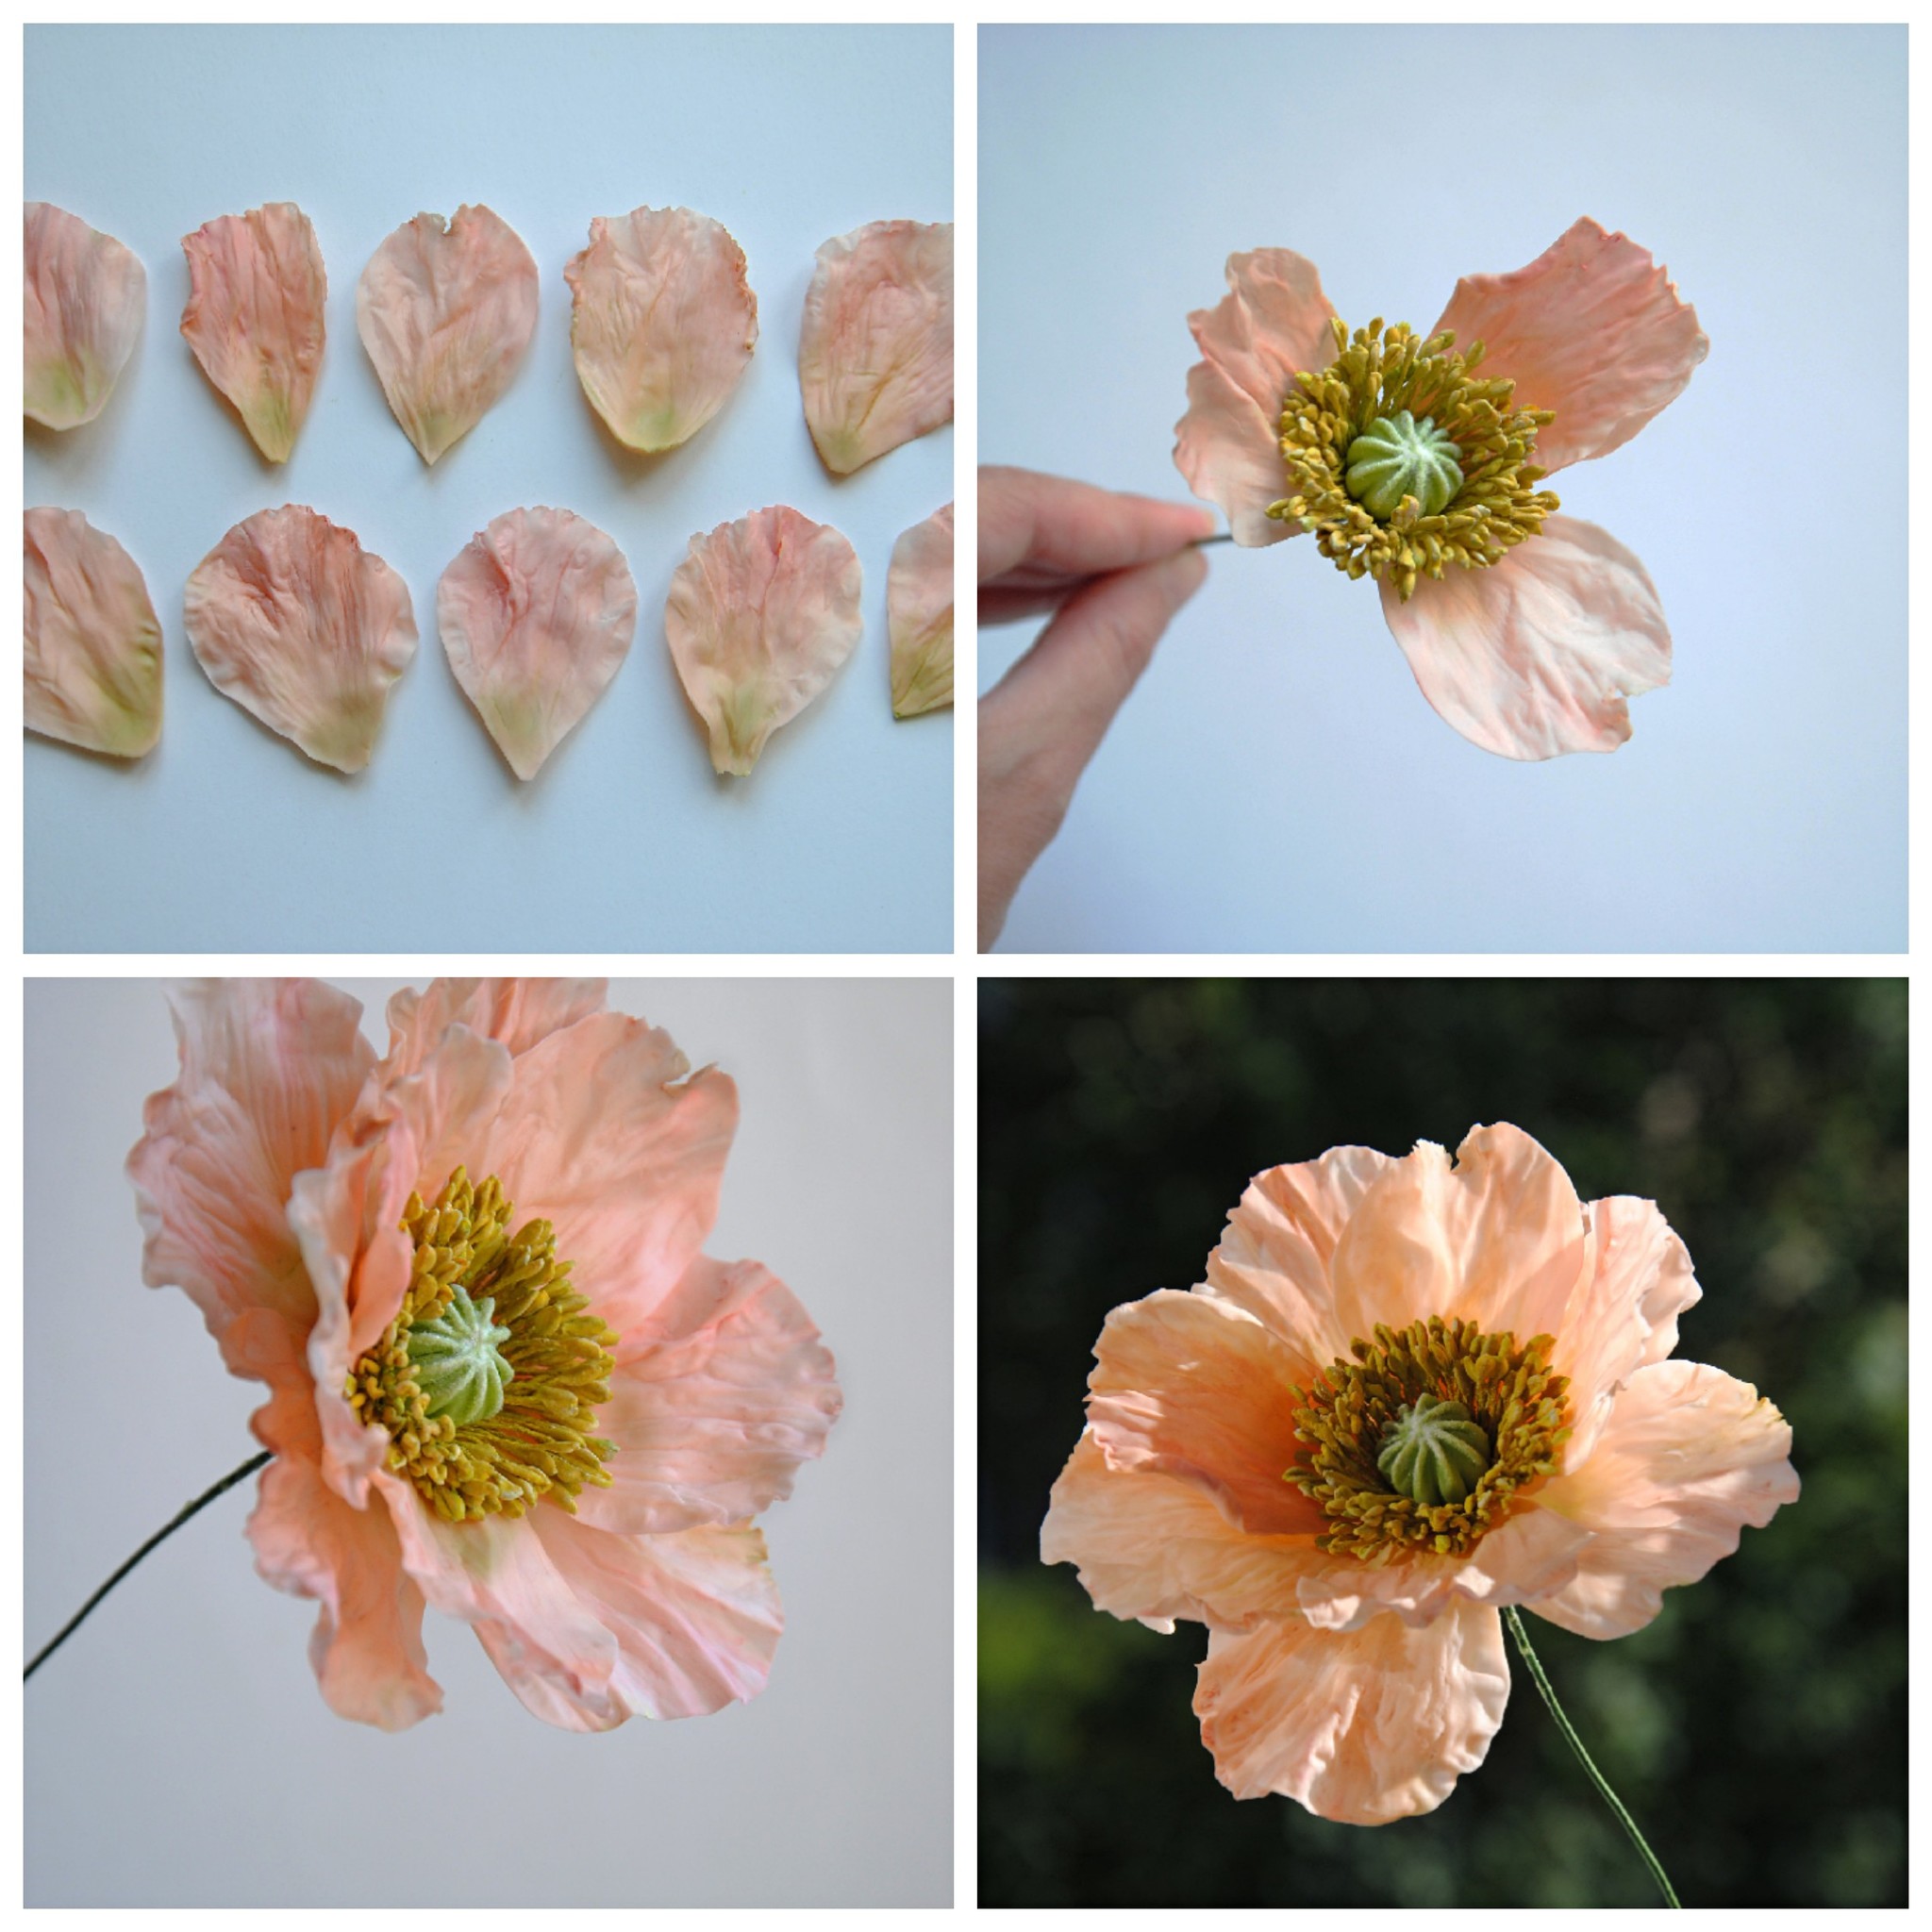 Making a poppy from cold porcelain - My, Polymer clay, Polymer floristry, Needlework with process, Flowers, Master Class, Cold porcelain, Longpost